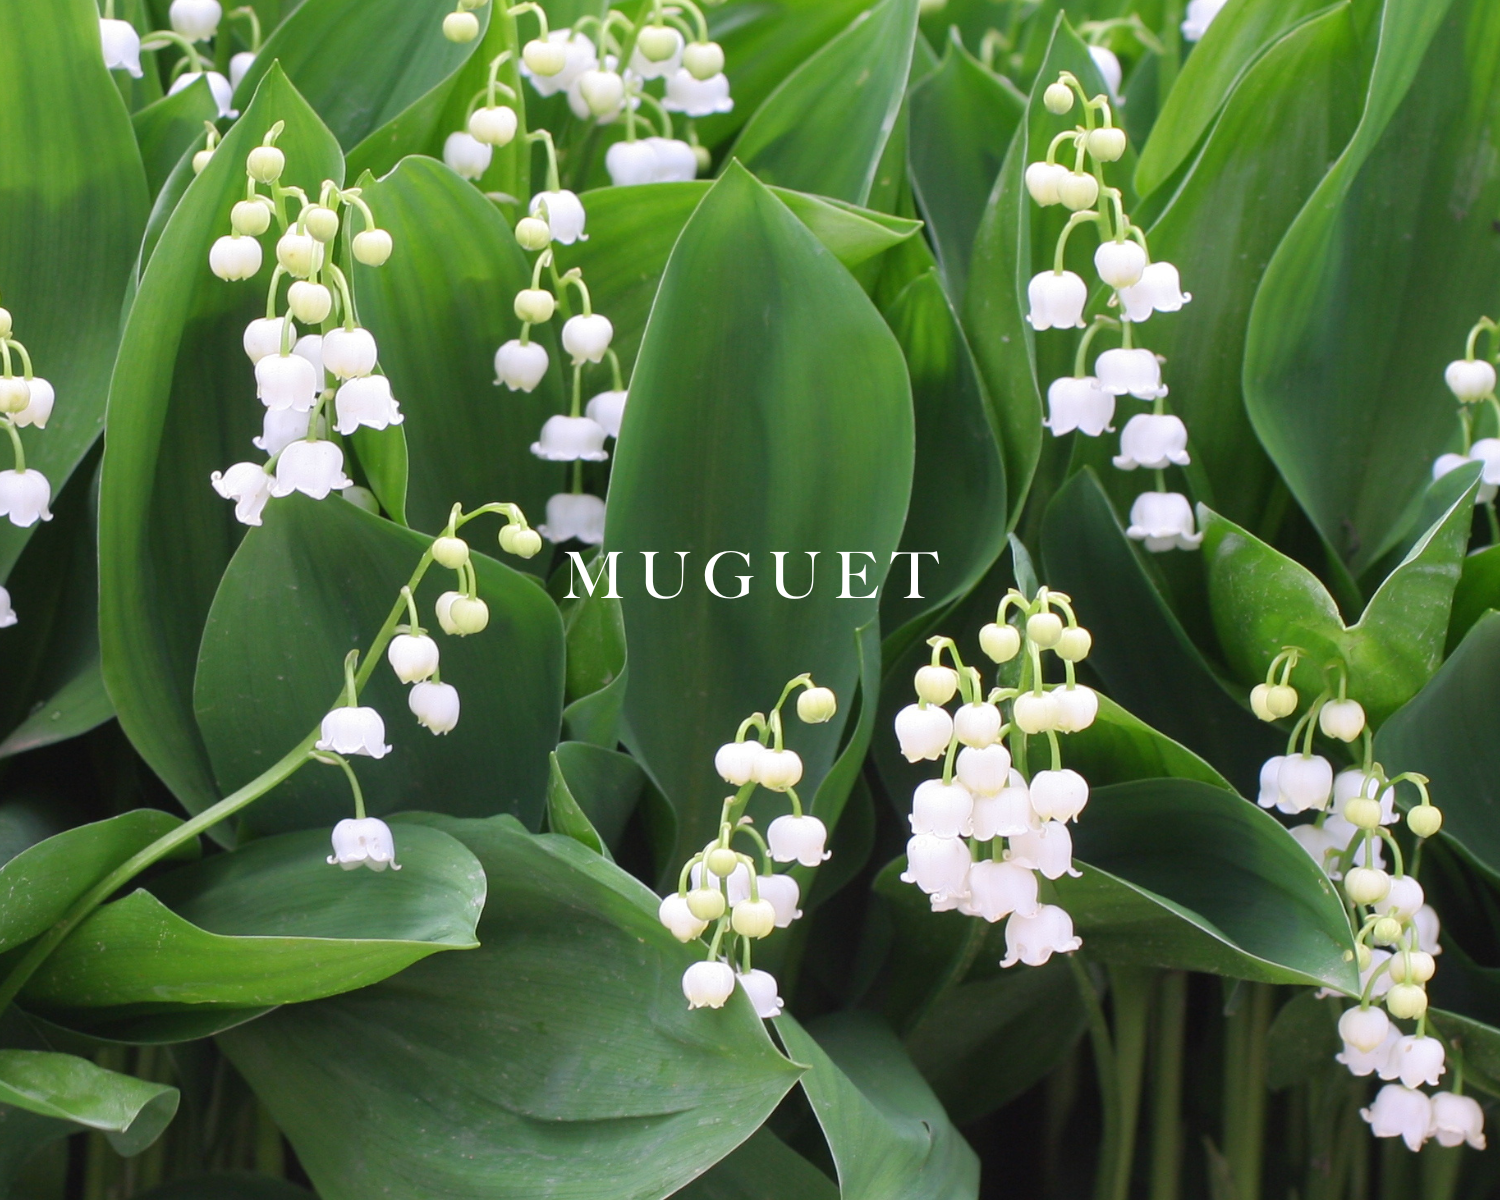 Caswell-Massey Lilac Eau de Toilette for Women: image of muguet white flowers to represent one of the scent notes